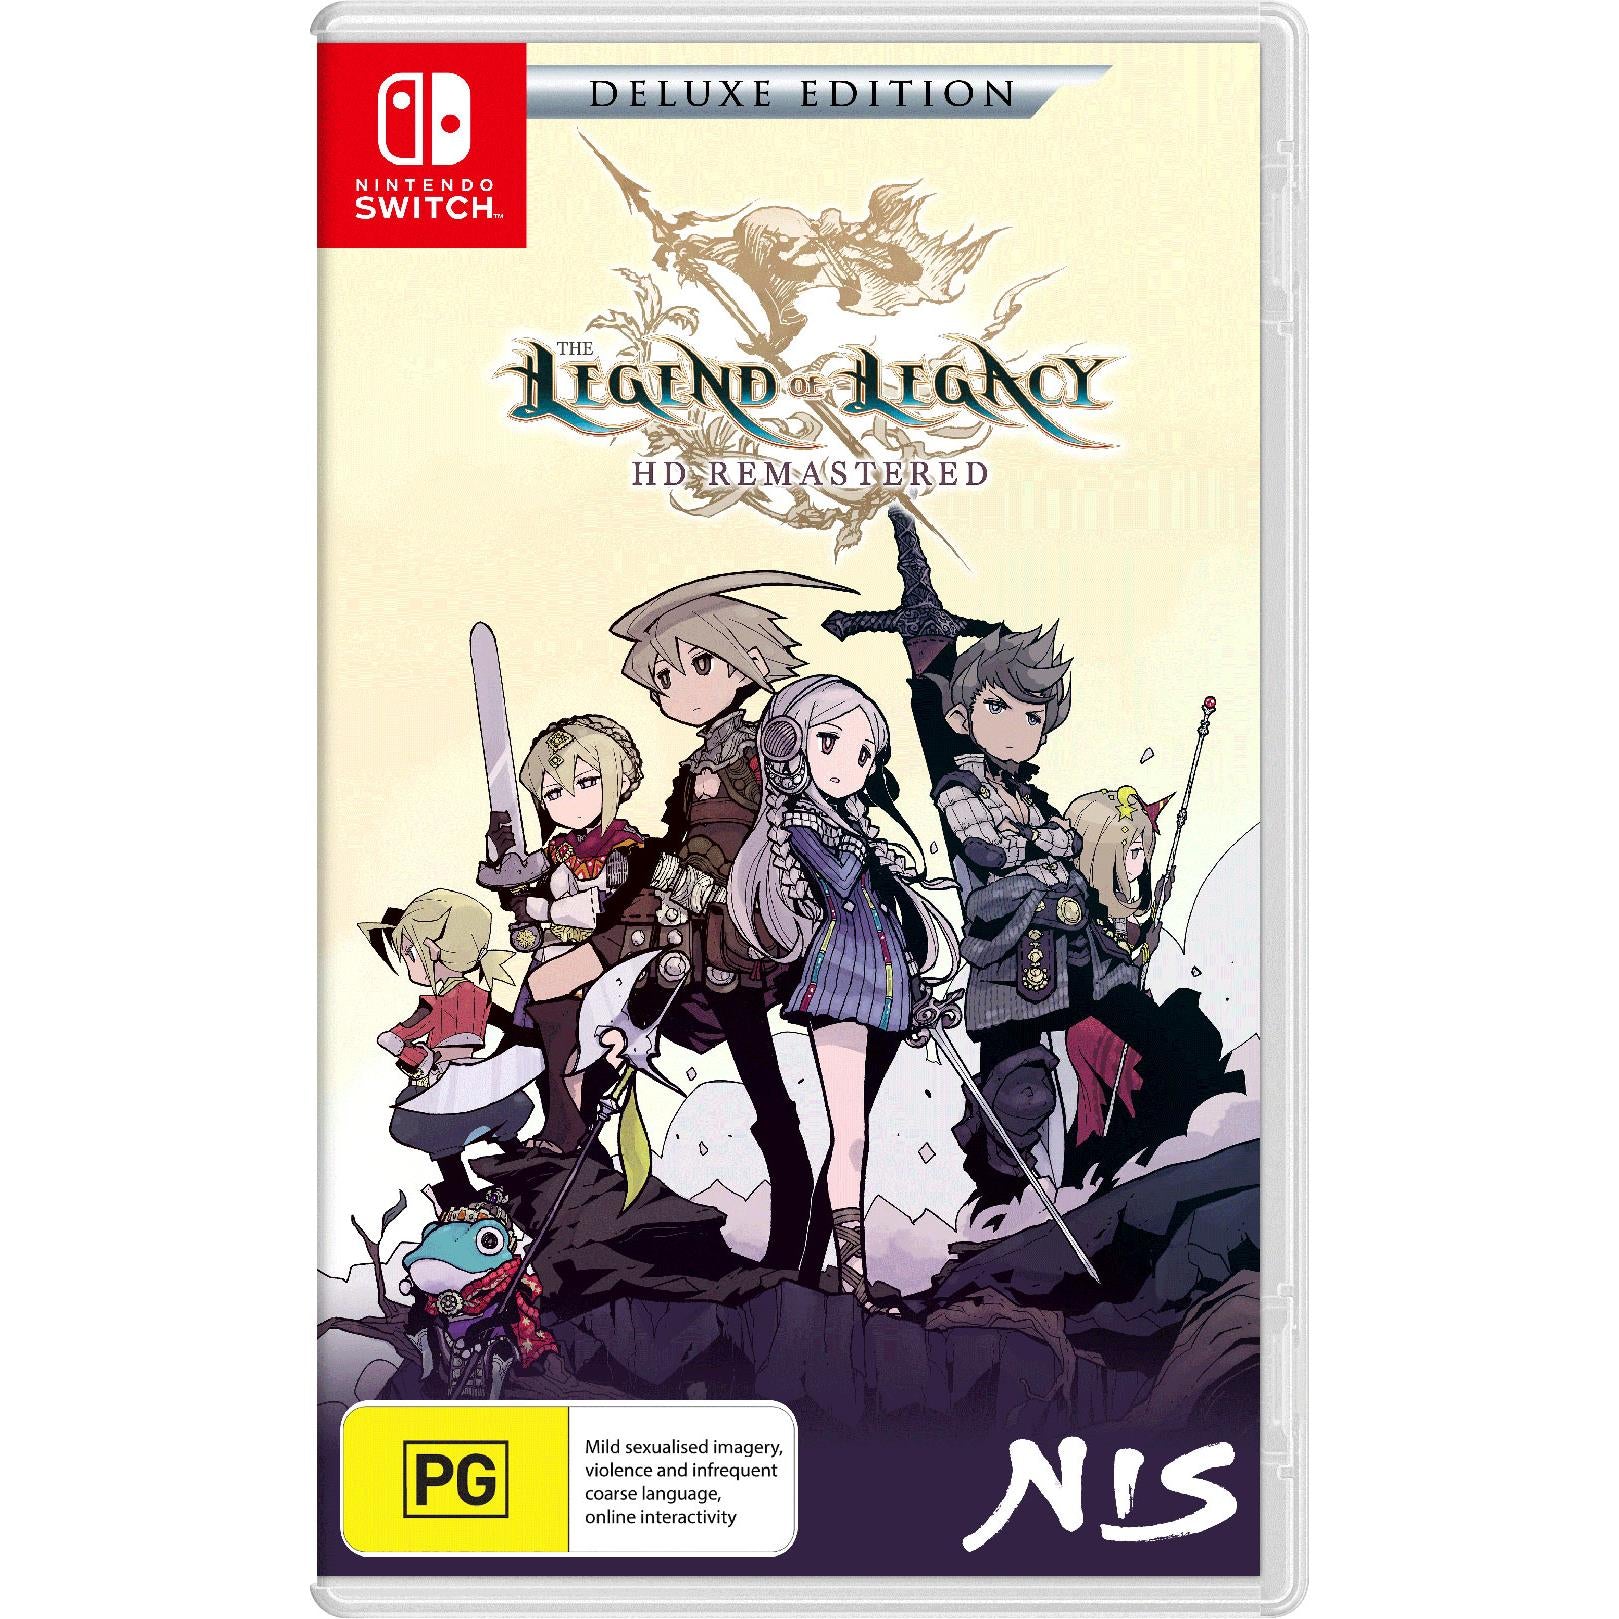 the legend of legacy hd remastered deluxe edition